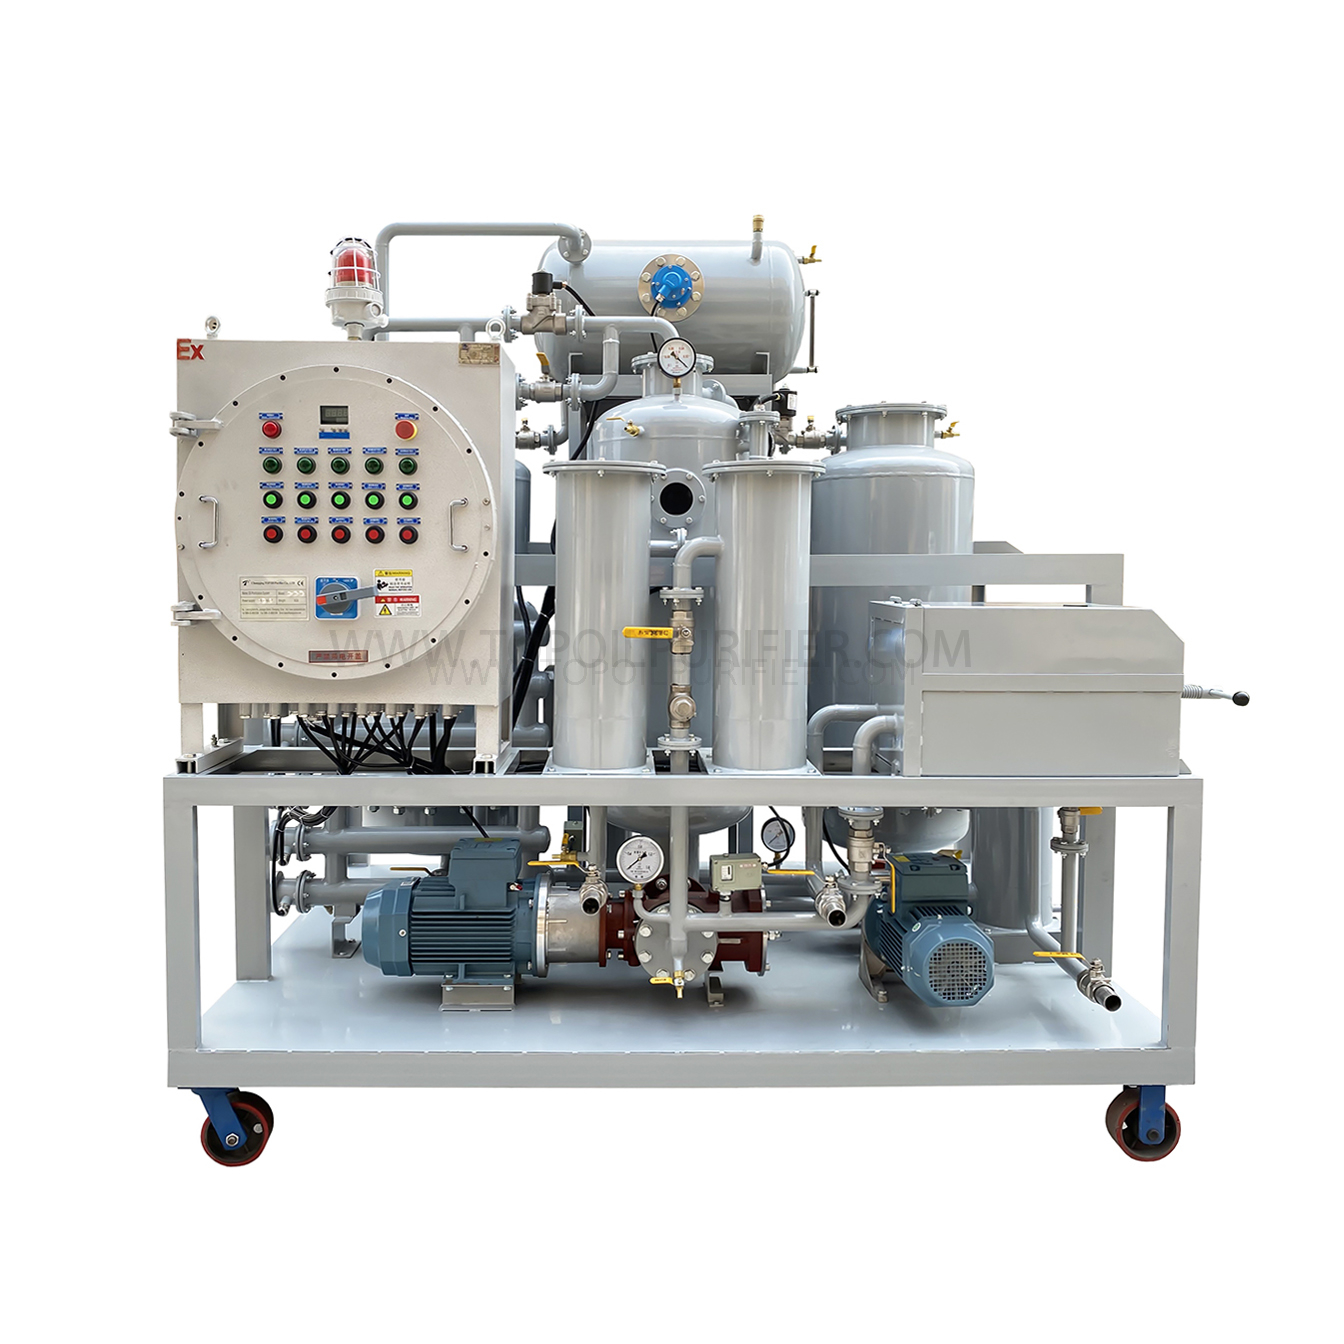 TYR-Ex Diesel Fuel Oil Purification and Discolorization Machine